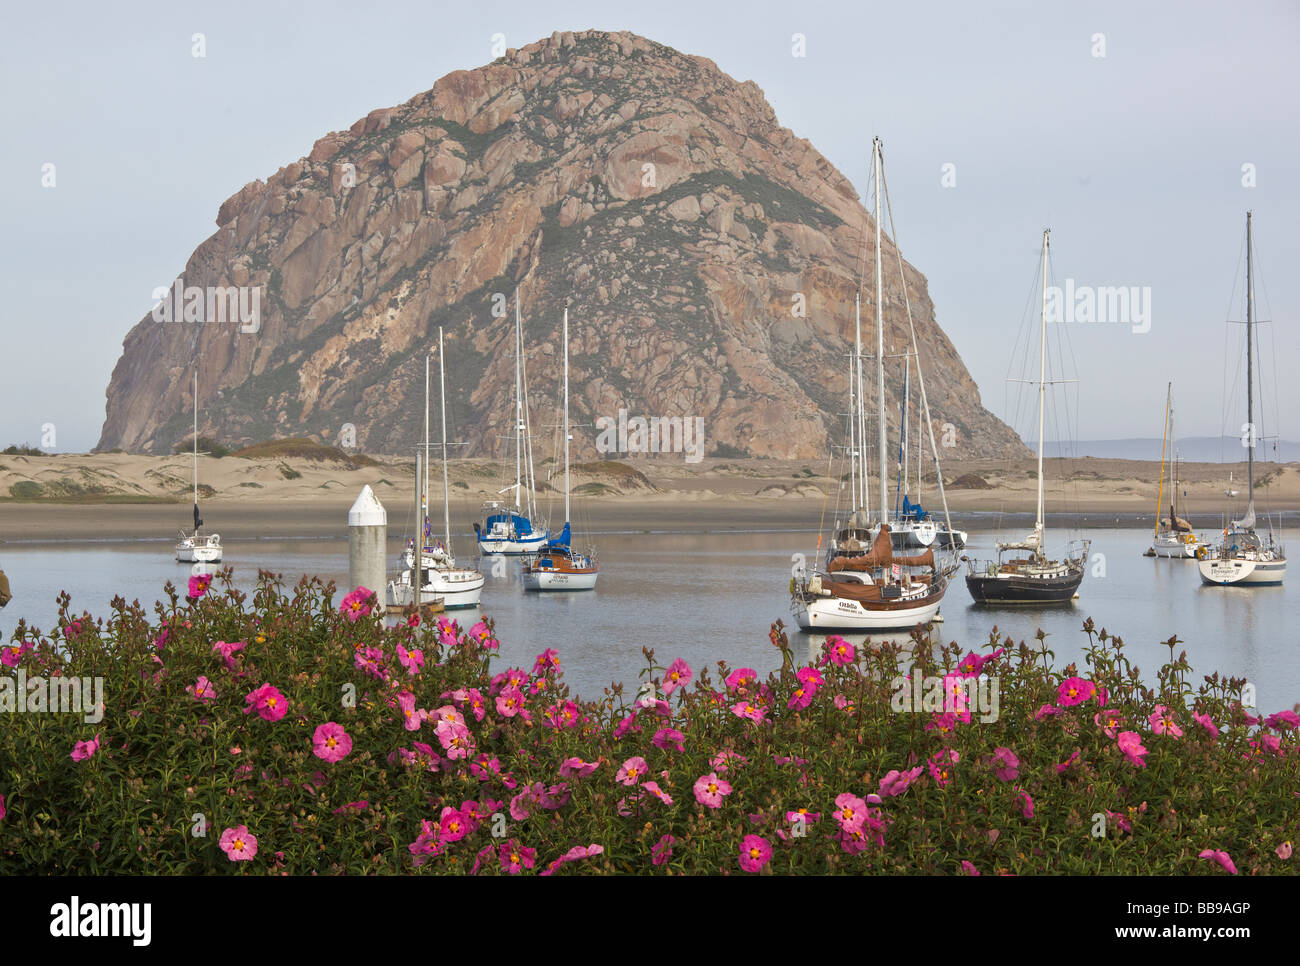 Morro Bay, San Luis Obispo County, CA: Blooming rock rose at Morro Bay with Morro rock and moored boats in the distance Stock Photo